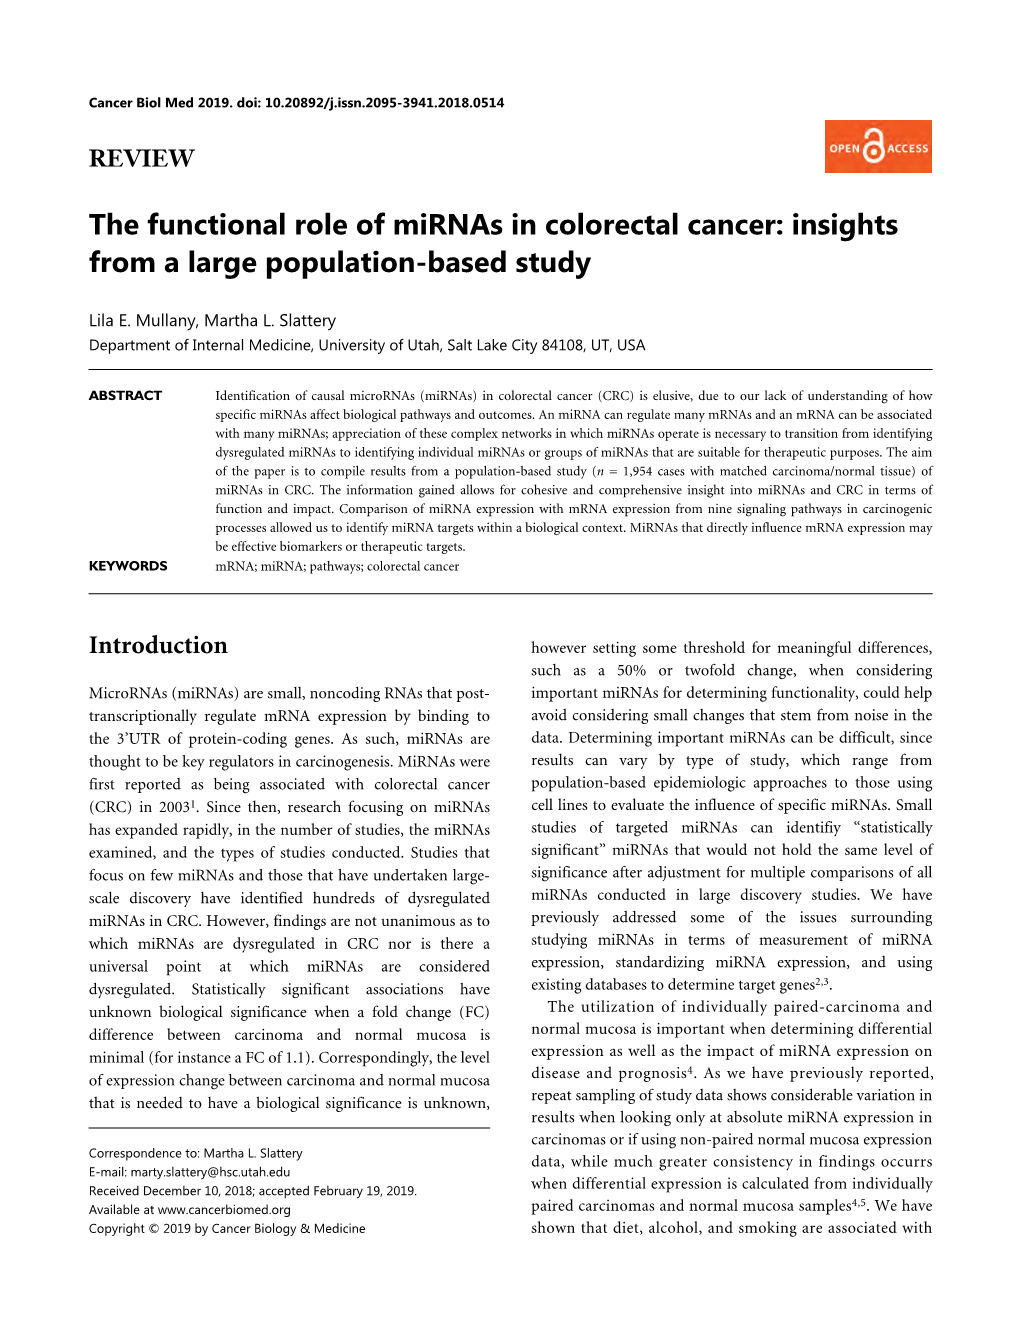 The Functional Role of Mirnas in Colorectal Cancer: Insights from a Large Population-Based Study